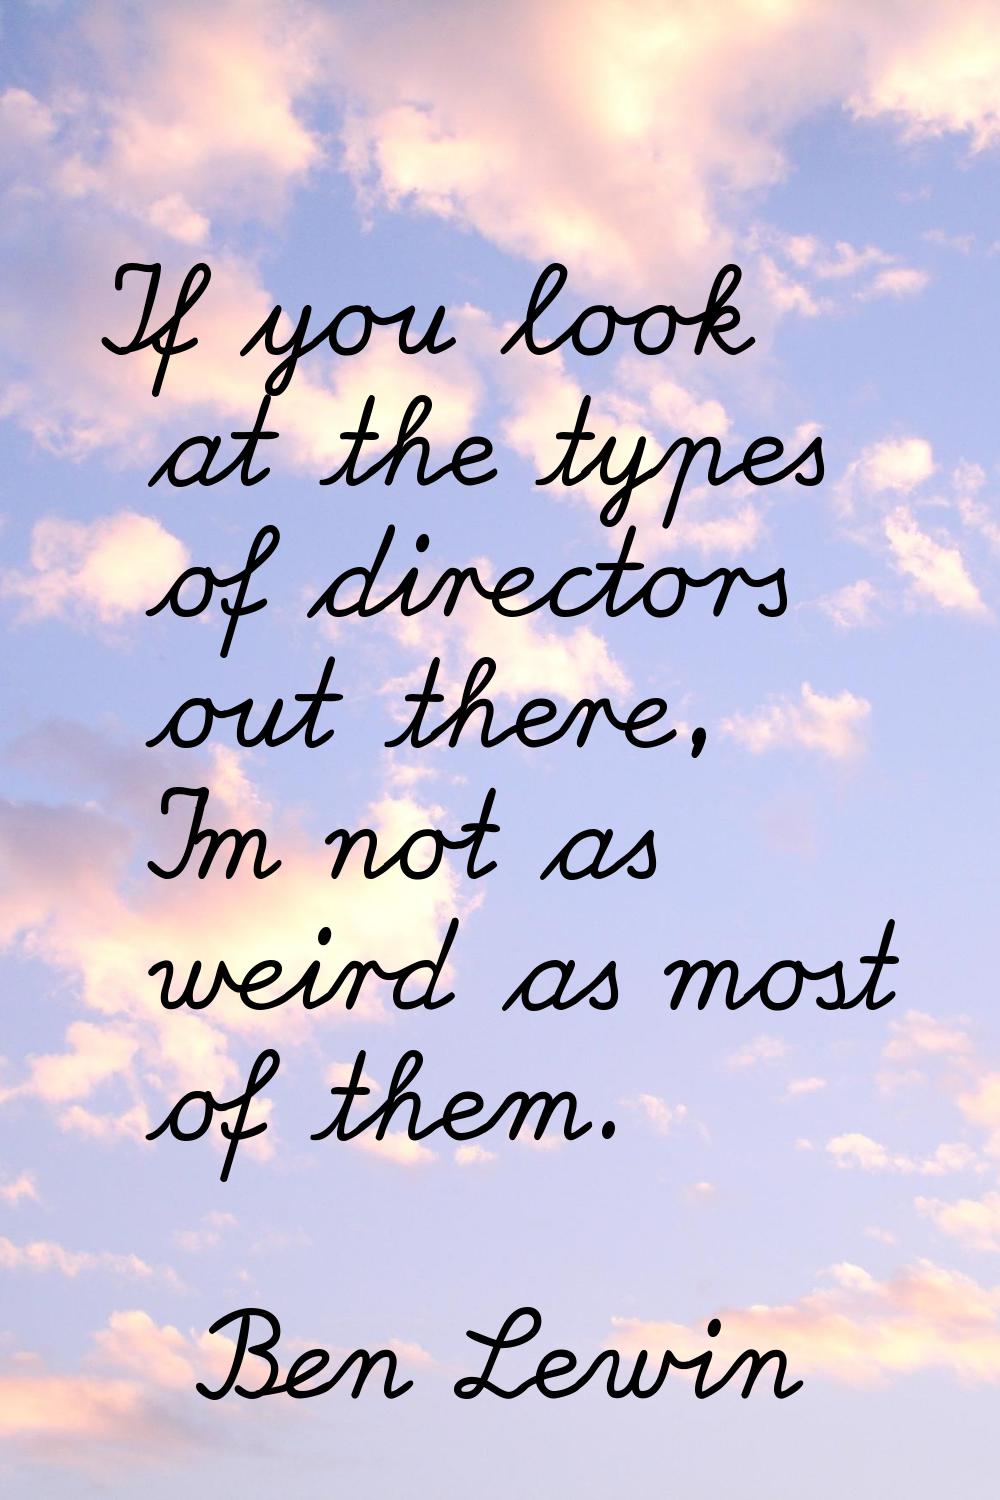 If you look at the types of directors out there, I'm not as weird as most of them.